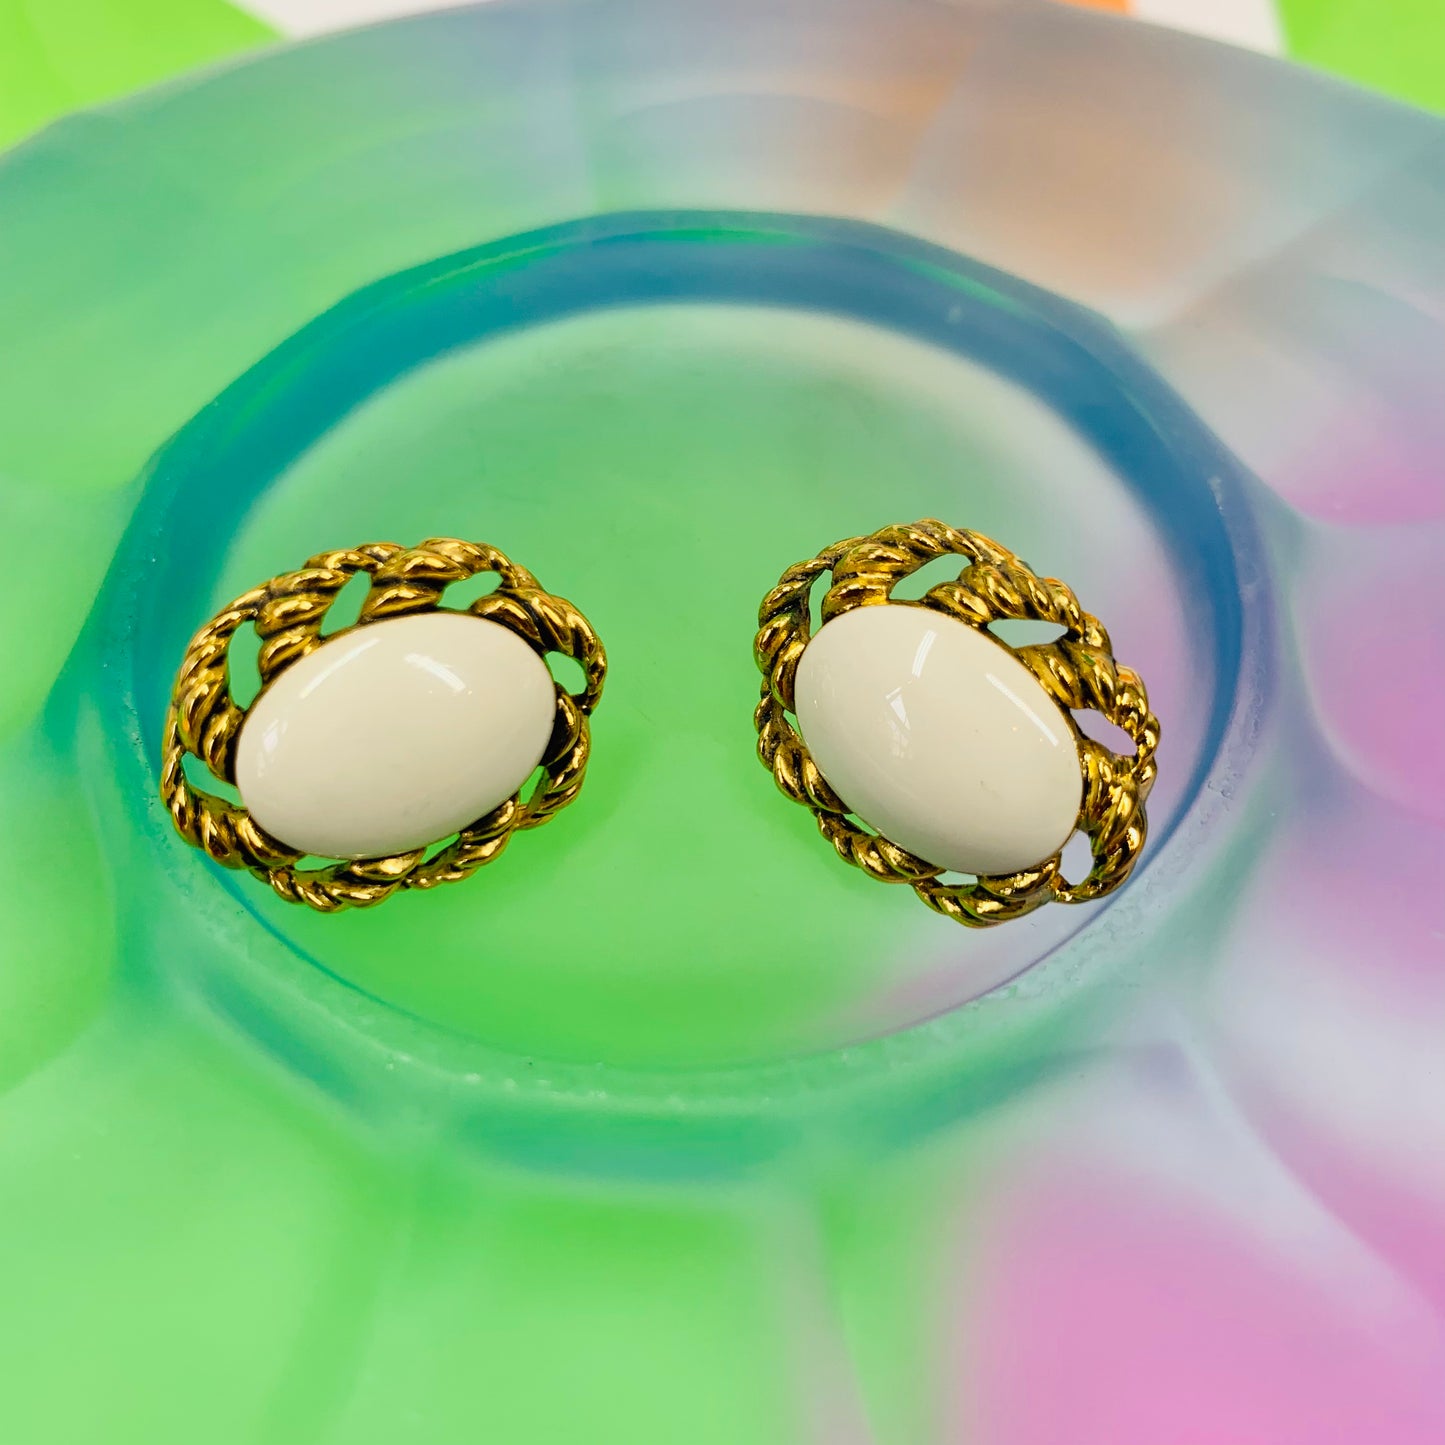 Rare 1960s Italian triple gold plated white enamel stud button earrings with gold knot borders